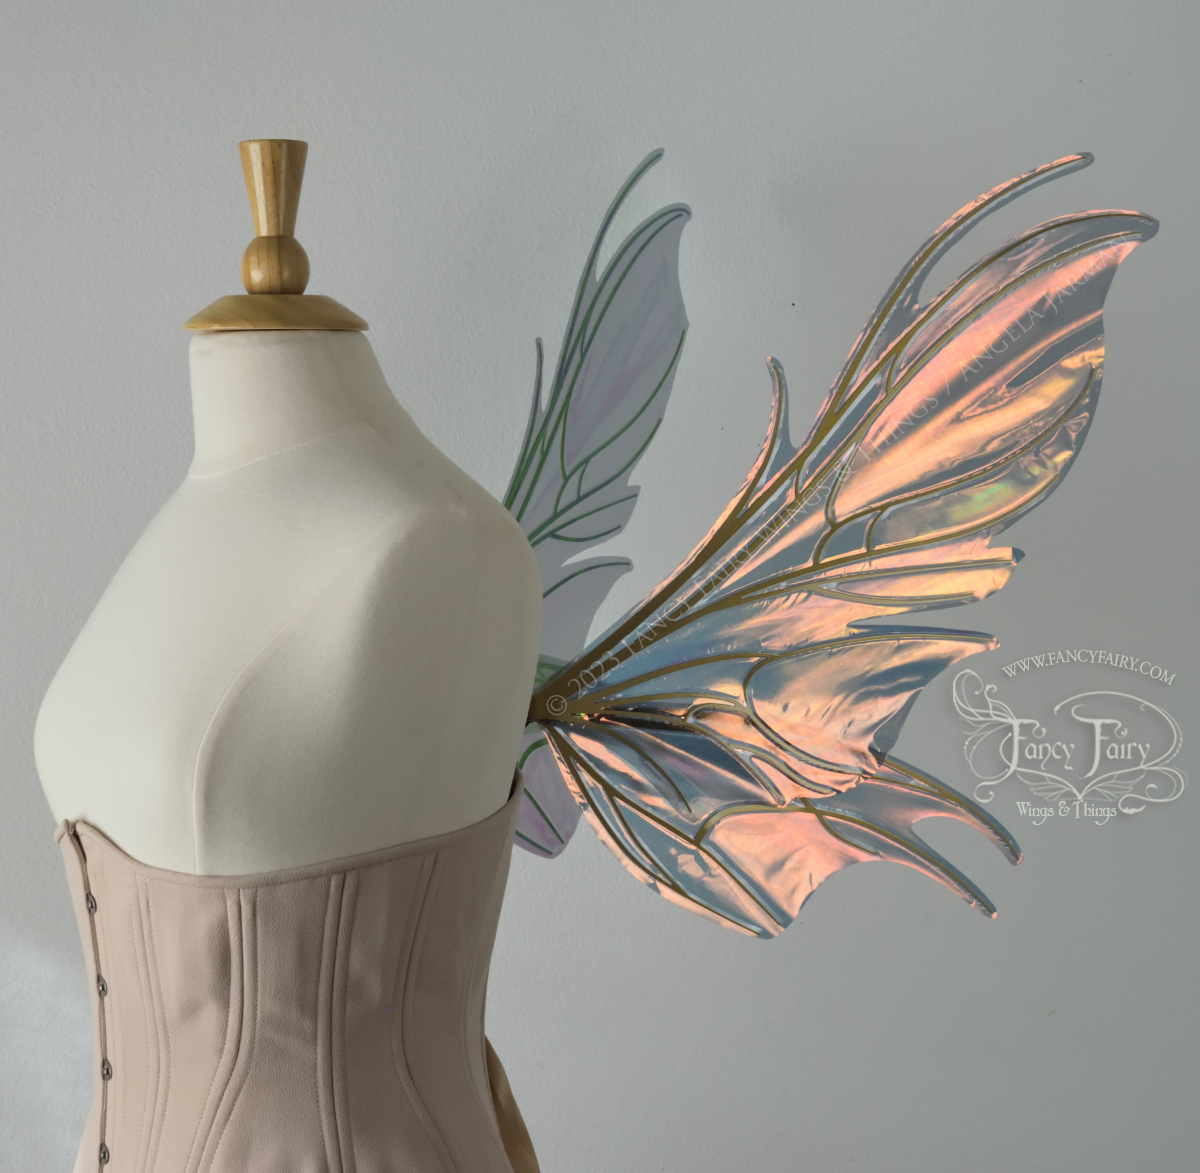 Right side view of iridescent orange & dark grey/blue fairy wings with spikey veins, worn by a dress form